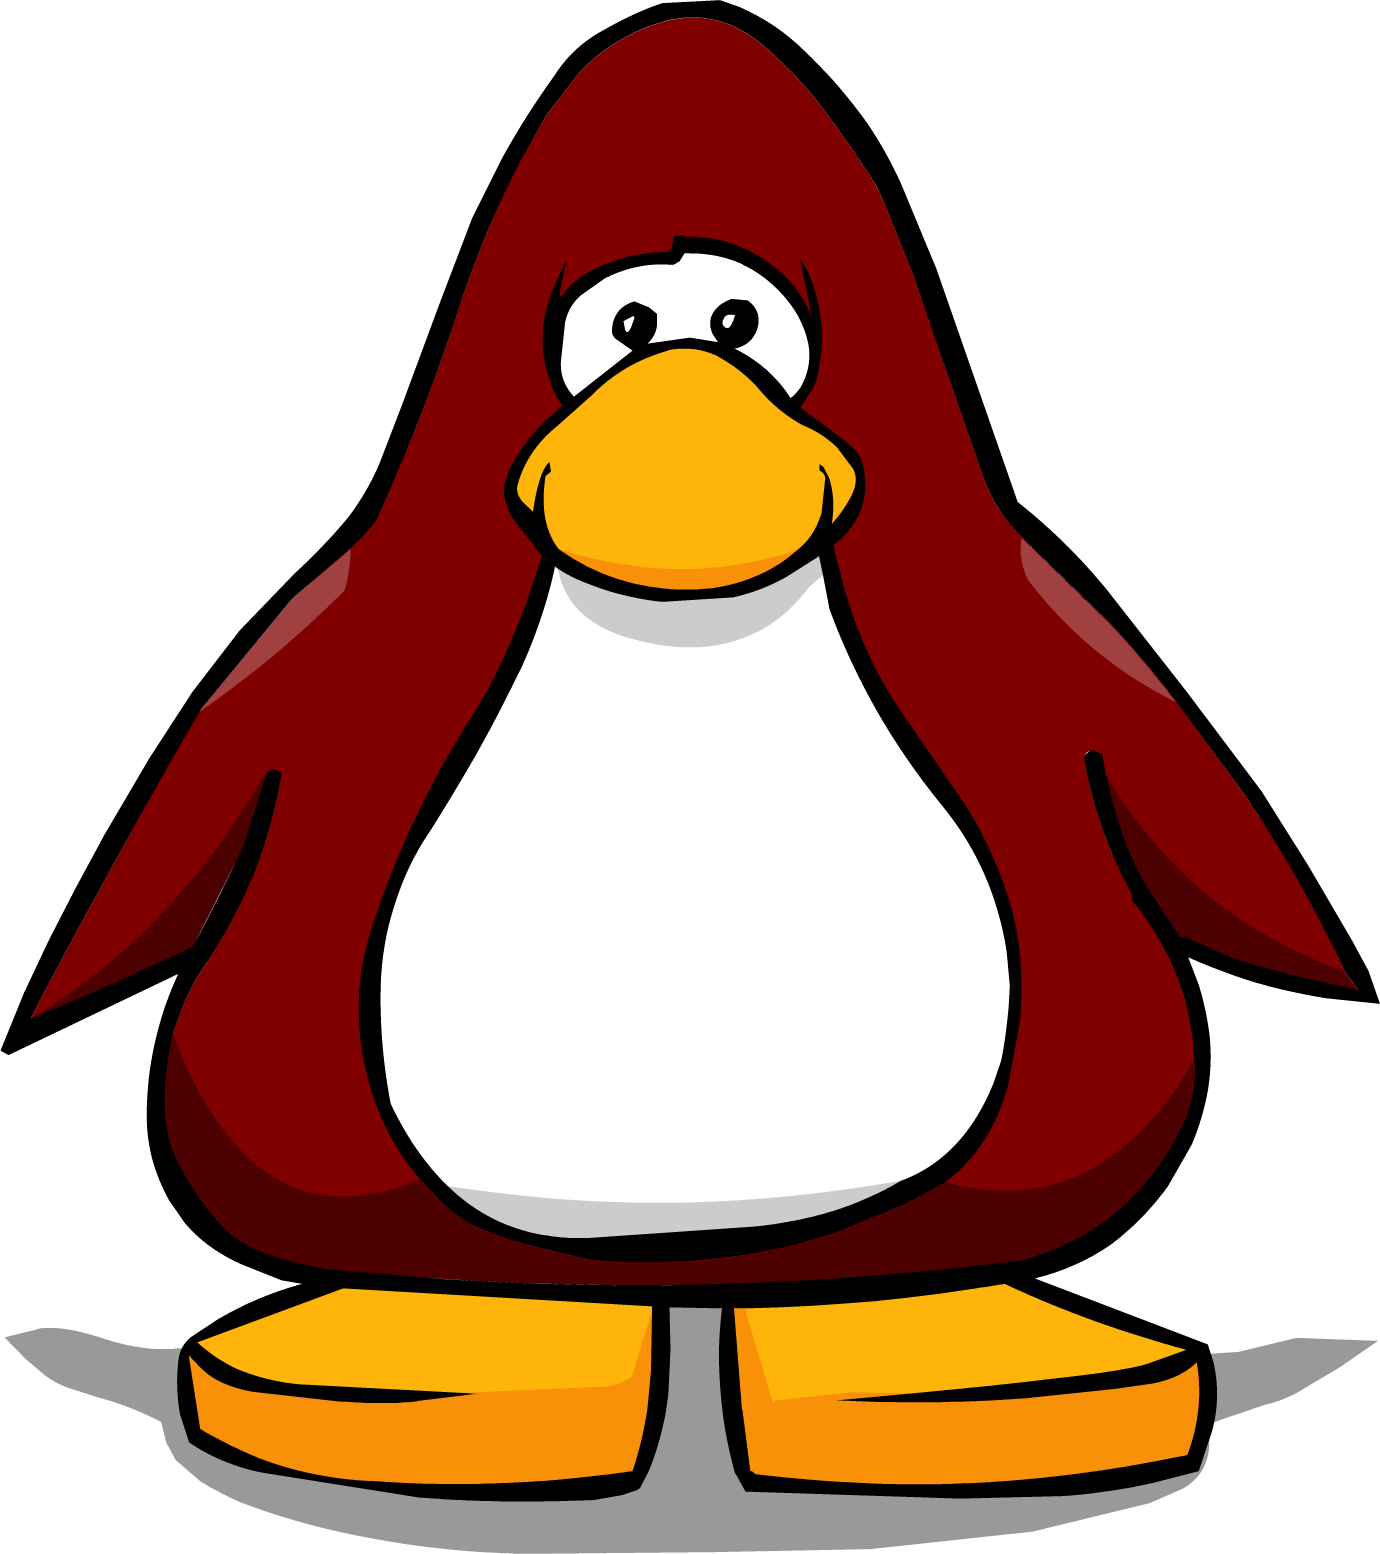 Dark Red From A Player Card - Club Penguin Ninja Mask (1380x1554)